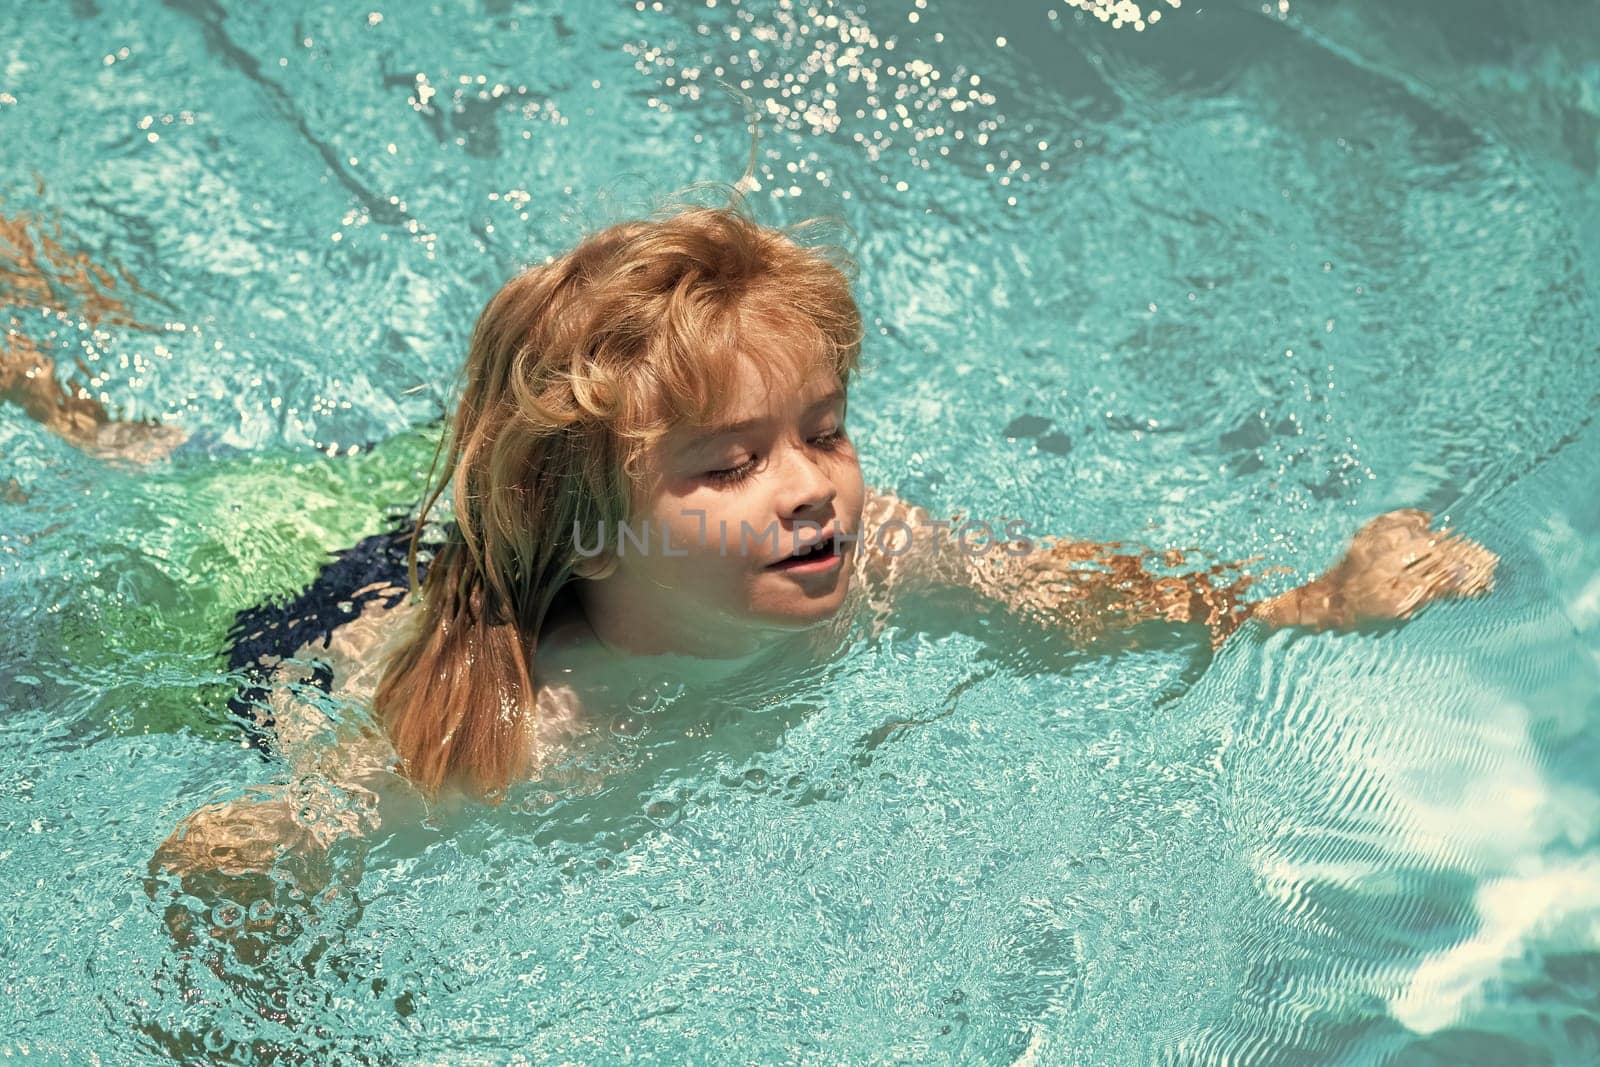 Child playing in the swimming pool. Summer kids activity. Little child playing in blue water